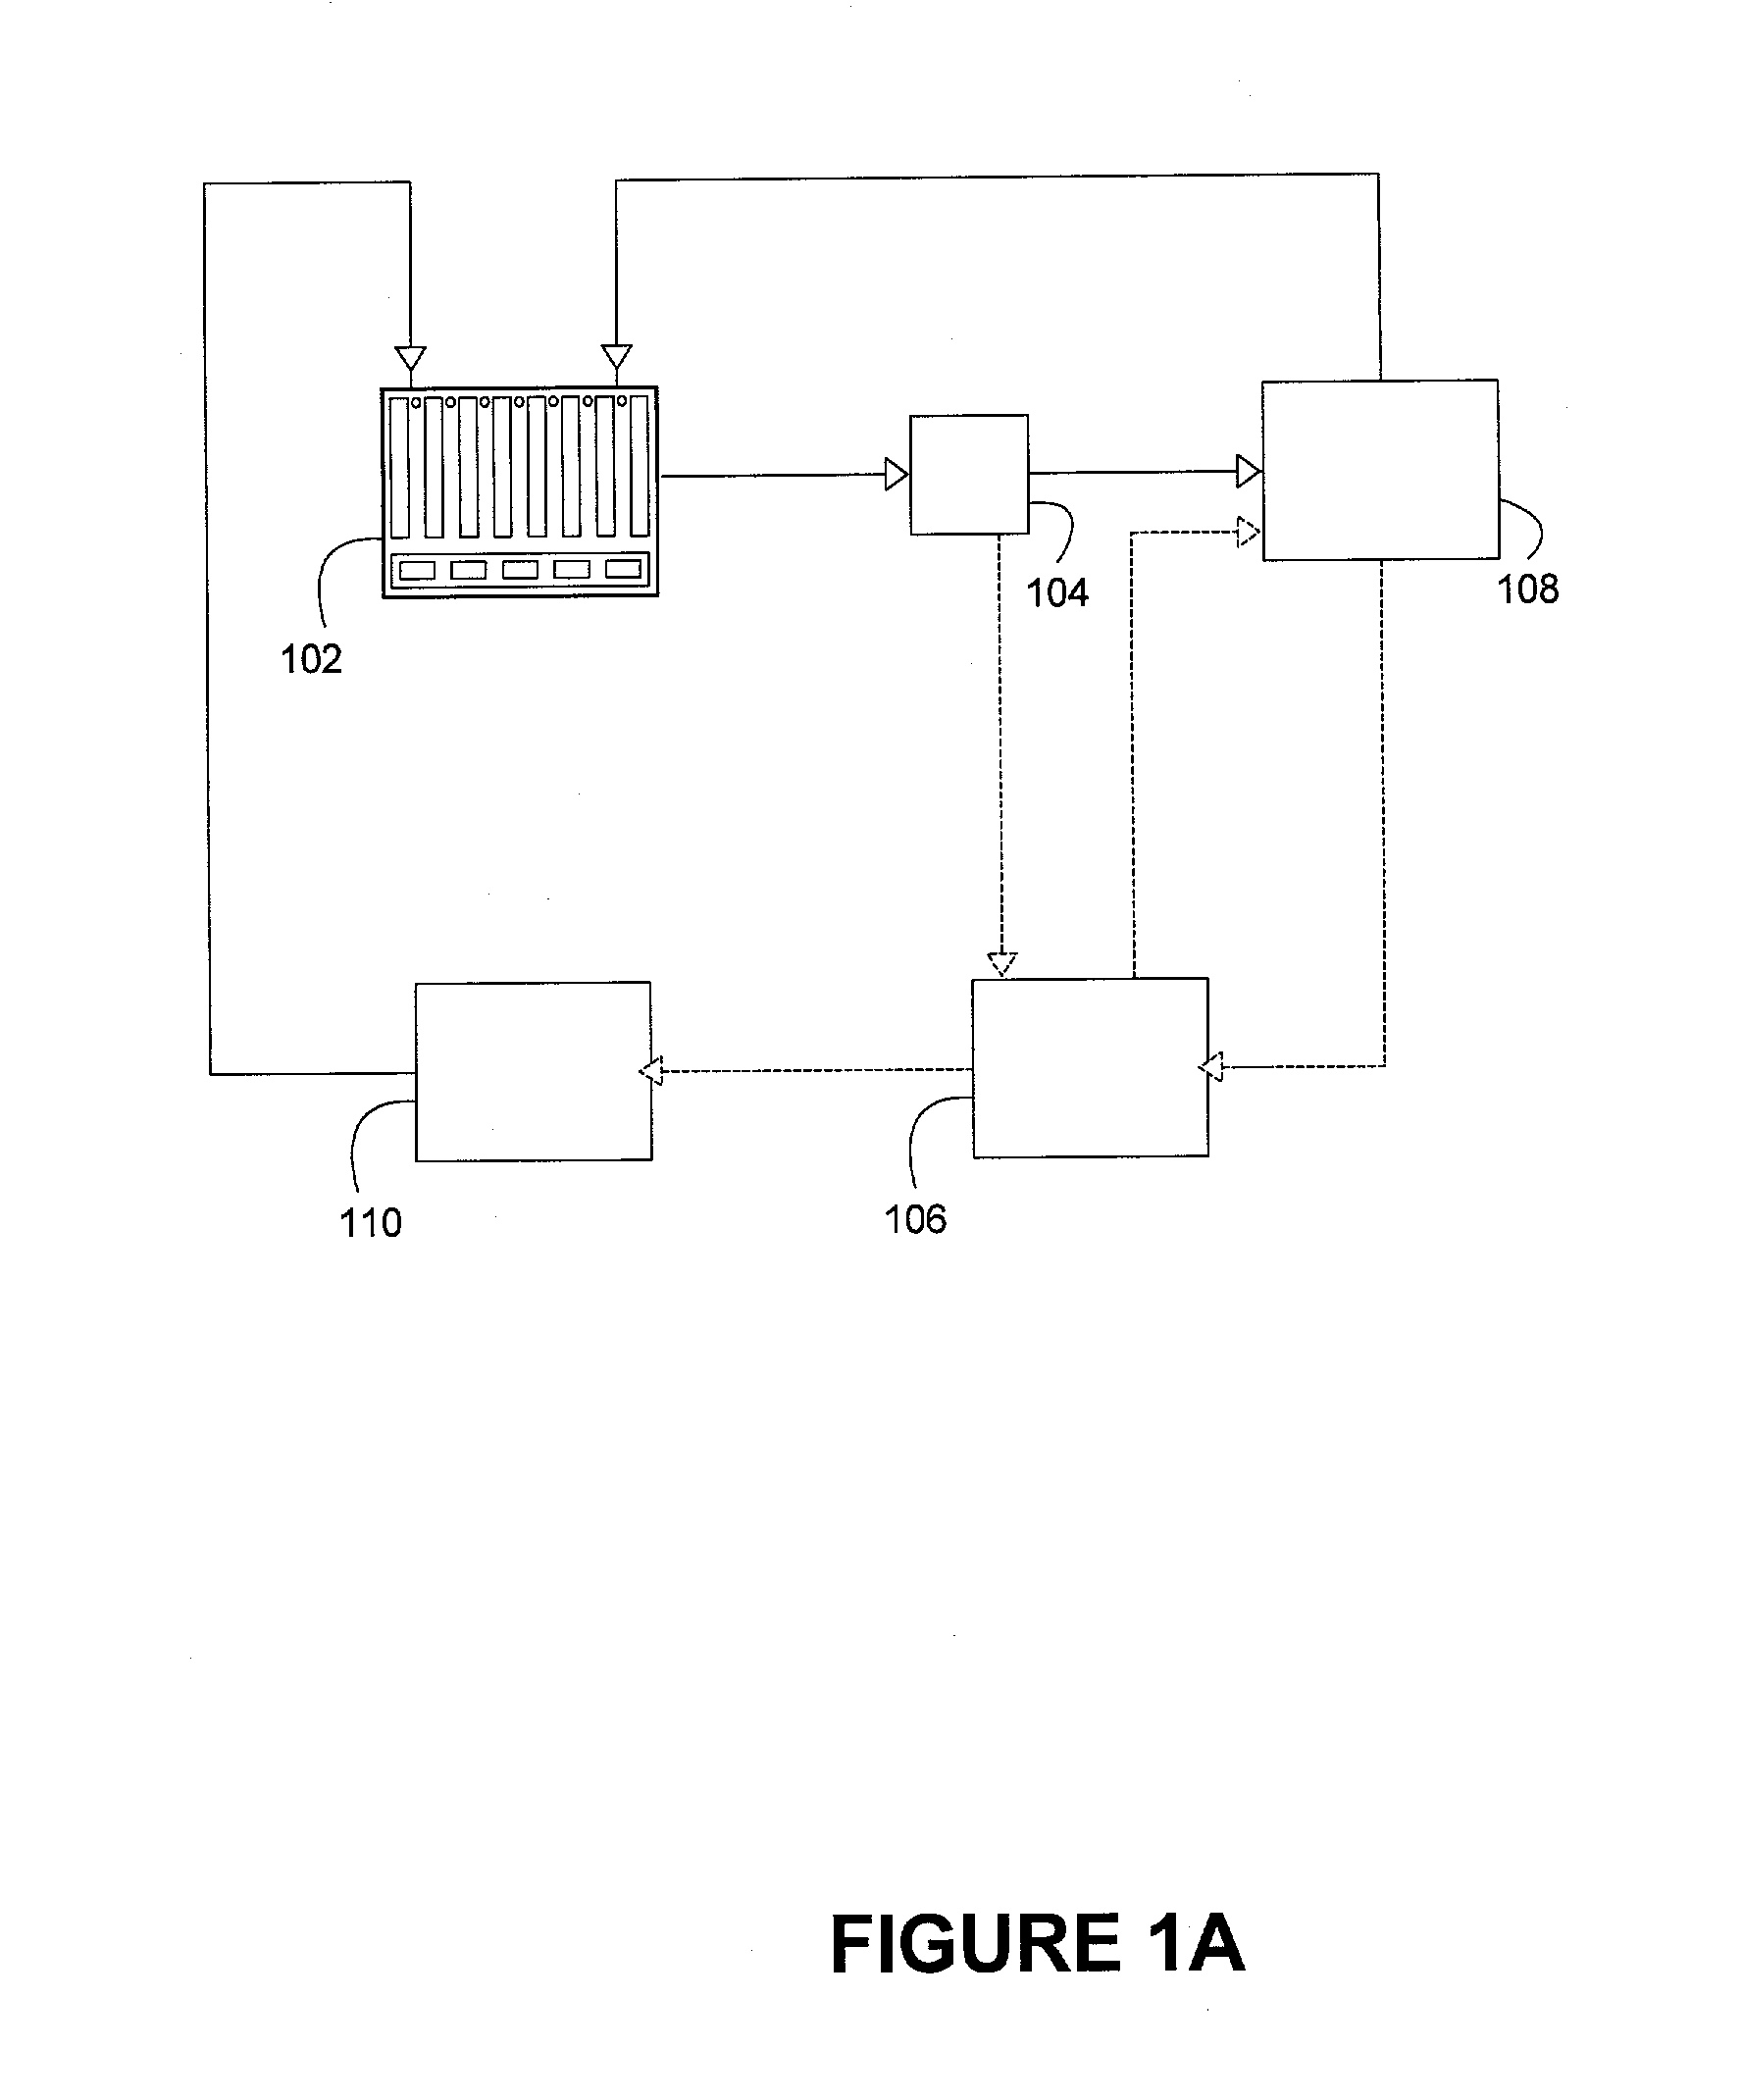 Method of and system for flushing one or more cells in a particle-based electrochemical power source in standby mode